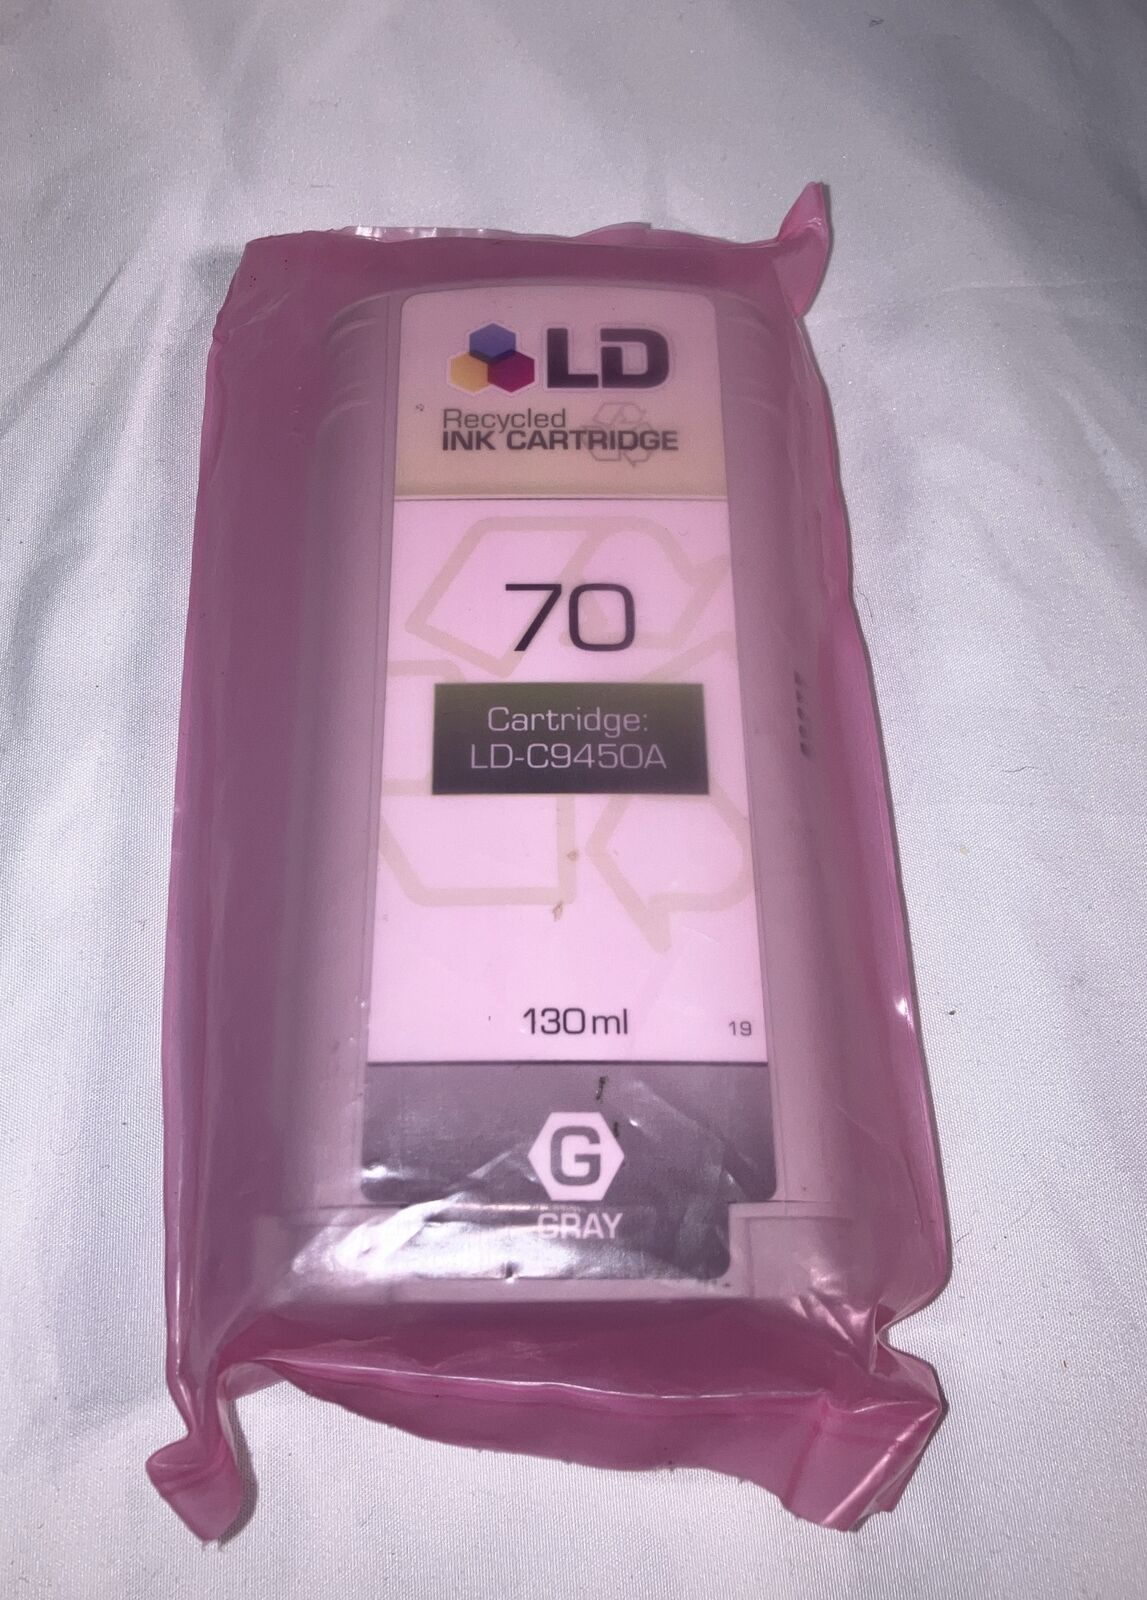 LD Recycled Ink Cartridge 70 Cartridge LD-C9450A  130 ml Gray Sealed.